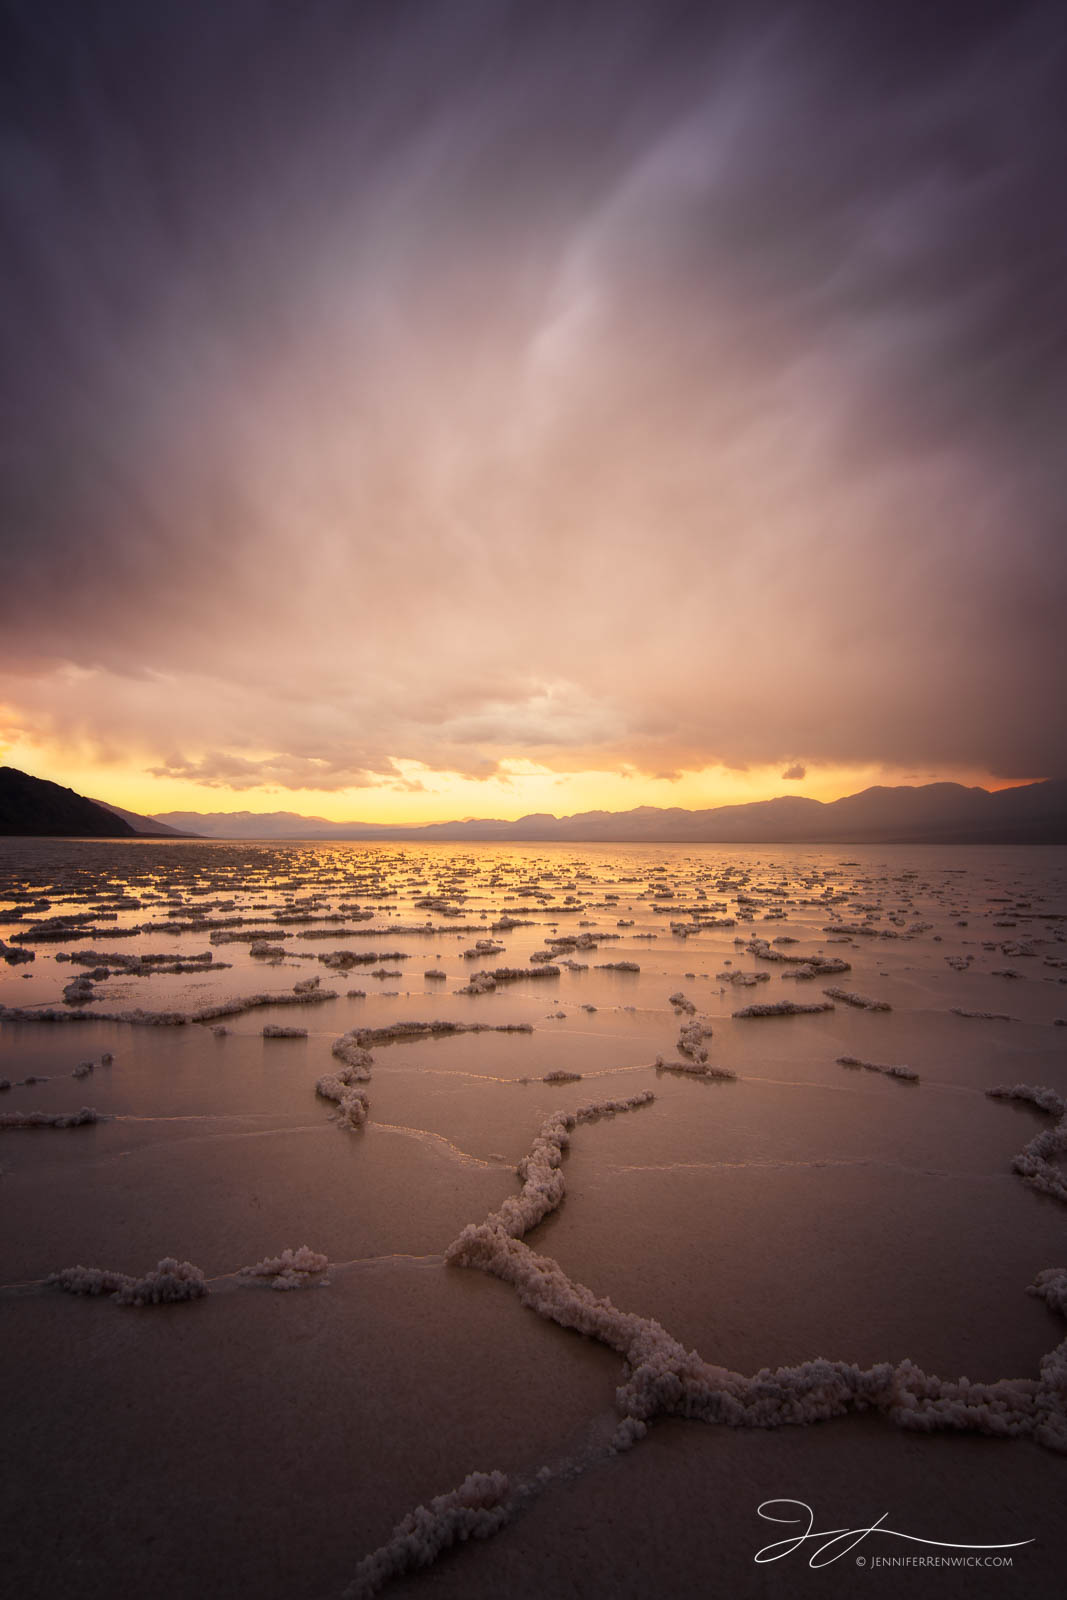 Dissolving salt polygons on Badwater Basin sit under glowing stormy skies during a beautiful sunset.